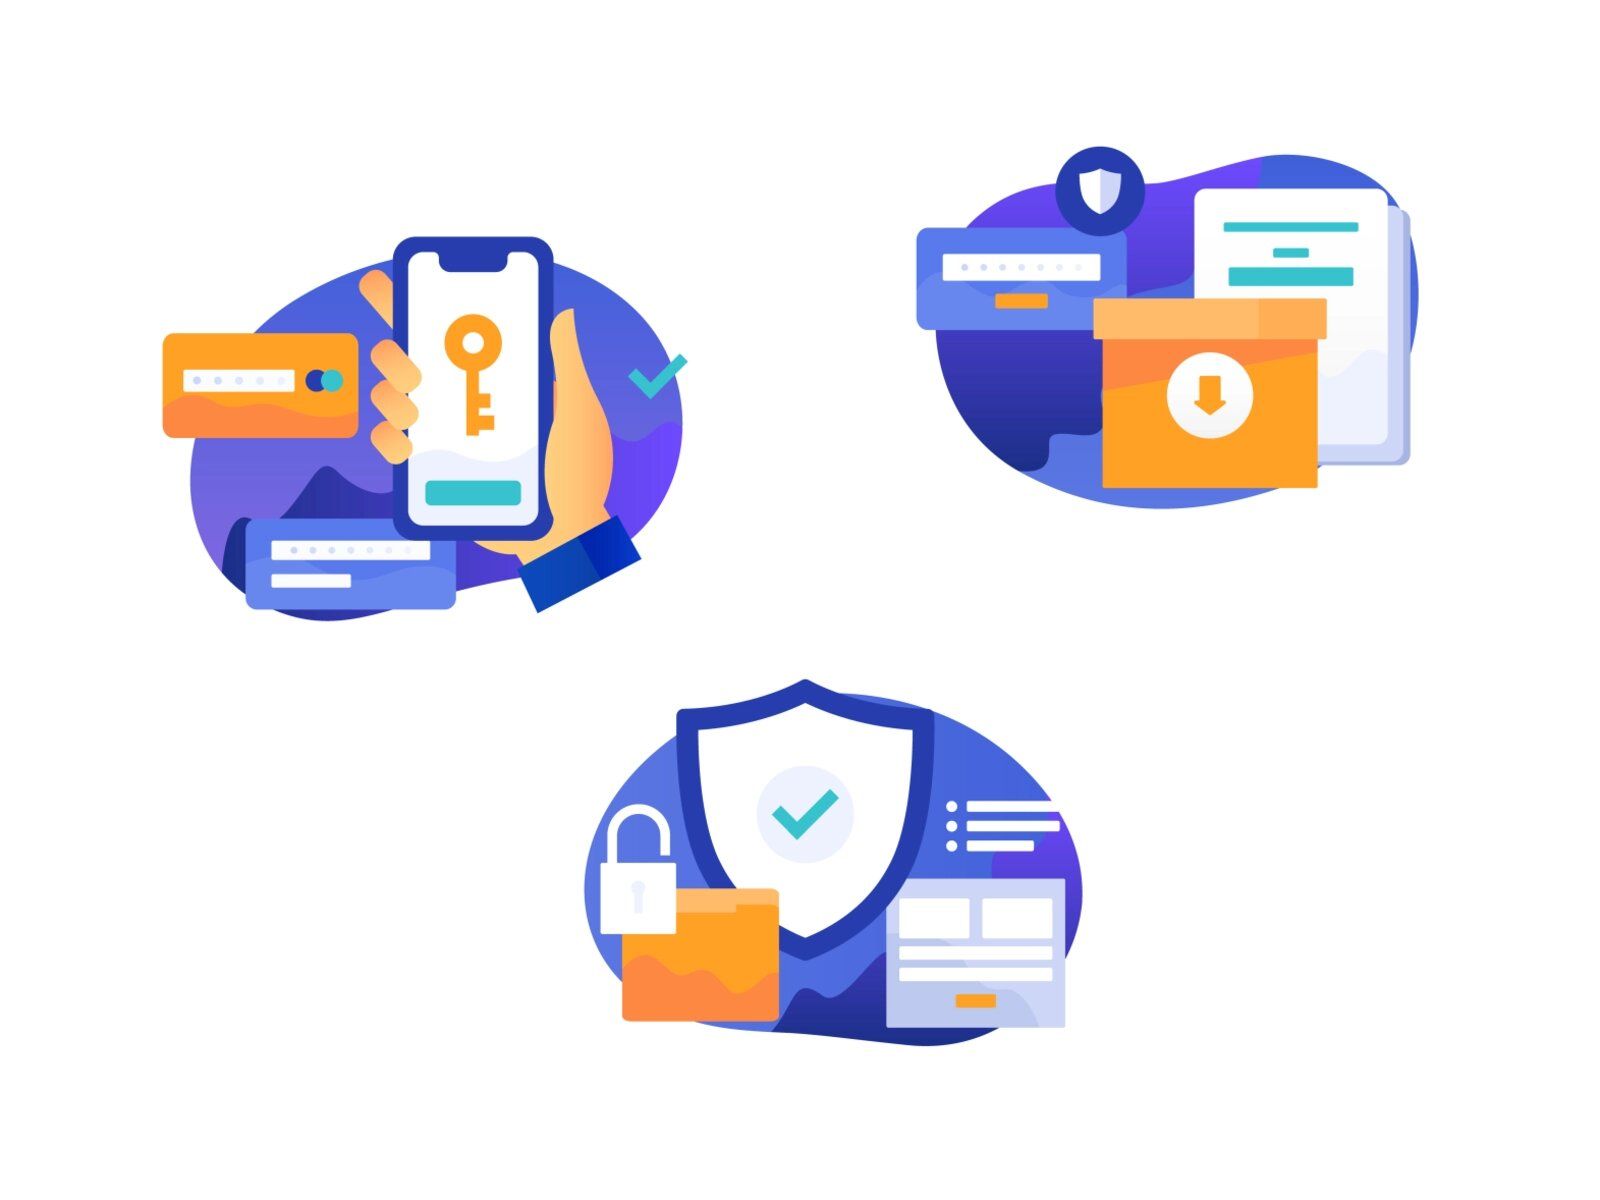 An accounting software should have a well-functioning testing system for security control, and with custom software, there are more option (*image by [Daria Zariankina](https://dribbble.com/Daria_Zariankina){ rel="nofollow" target="_blank" .default-md}*)